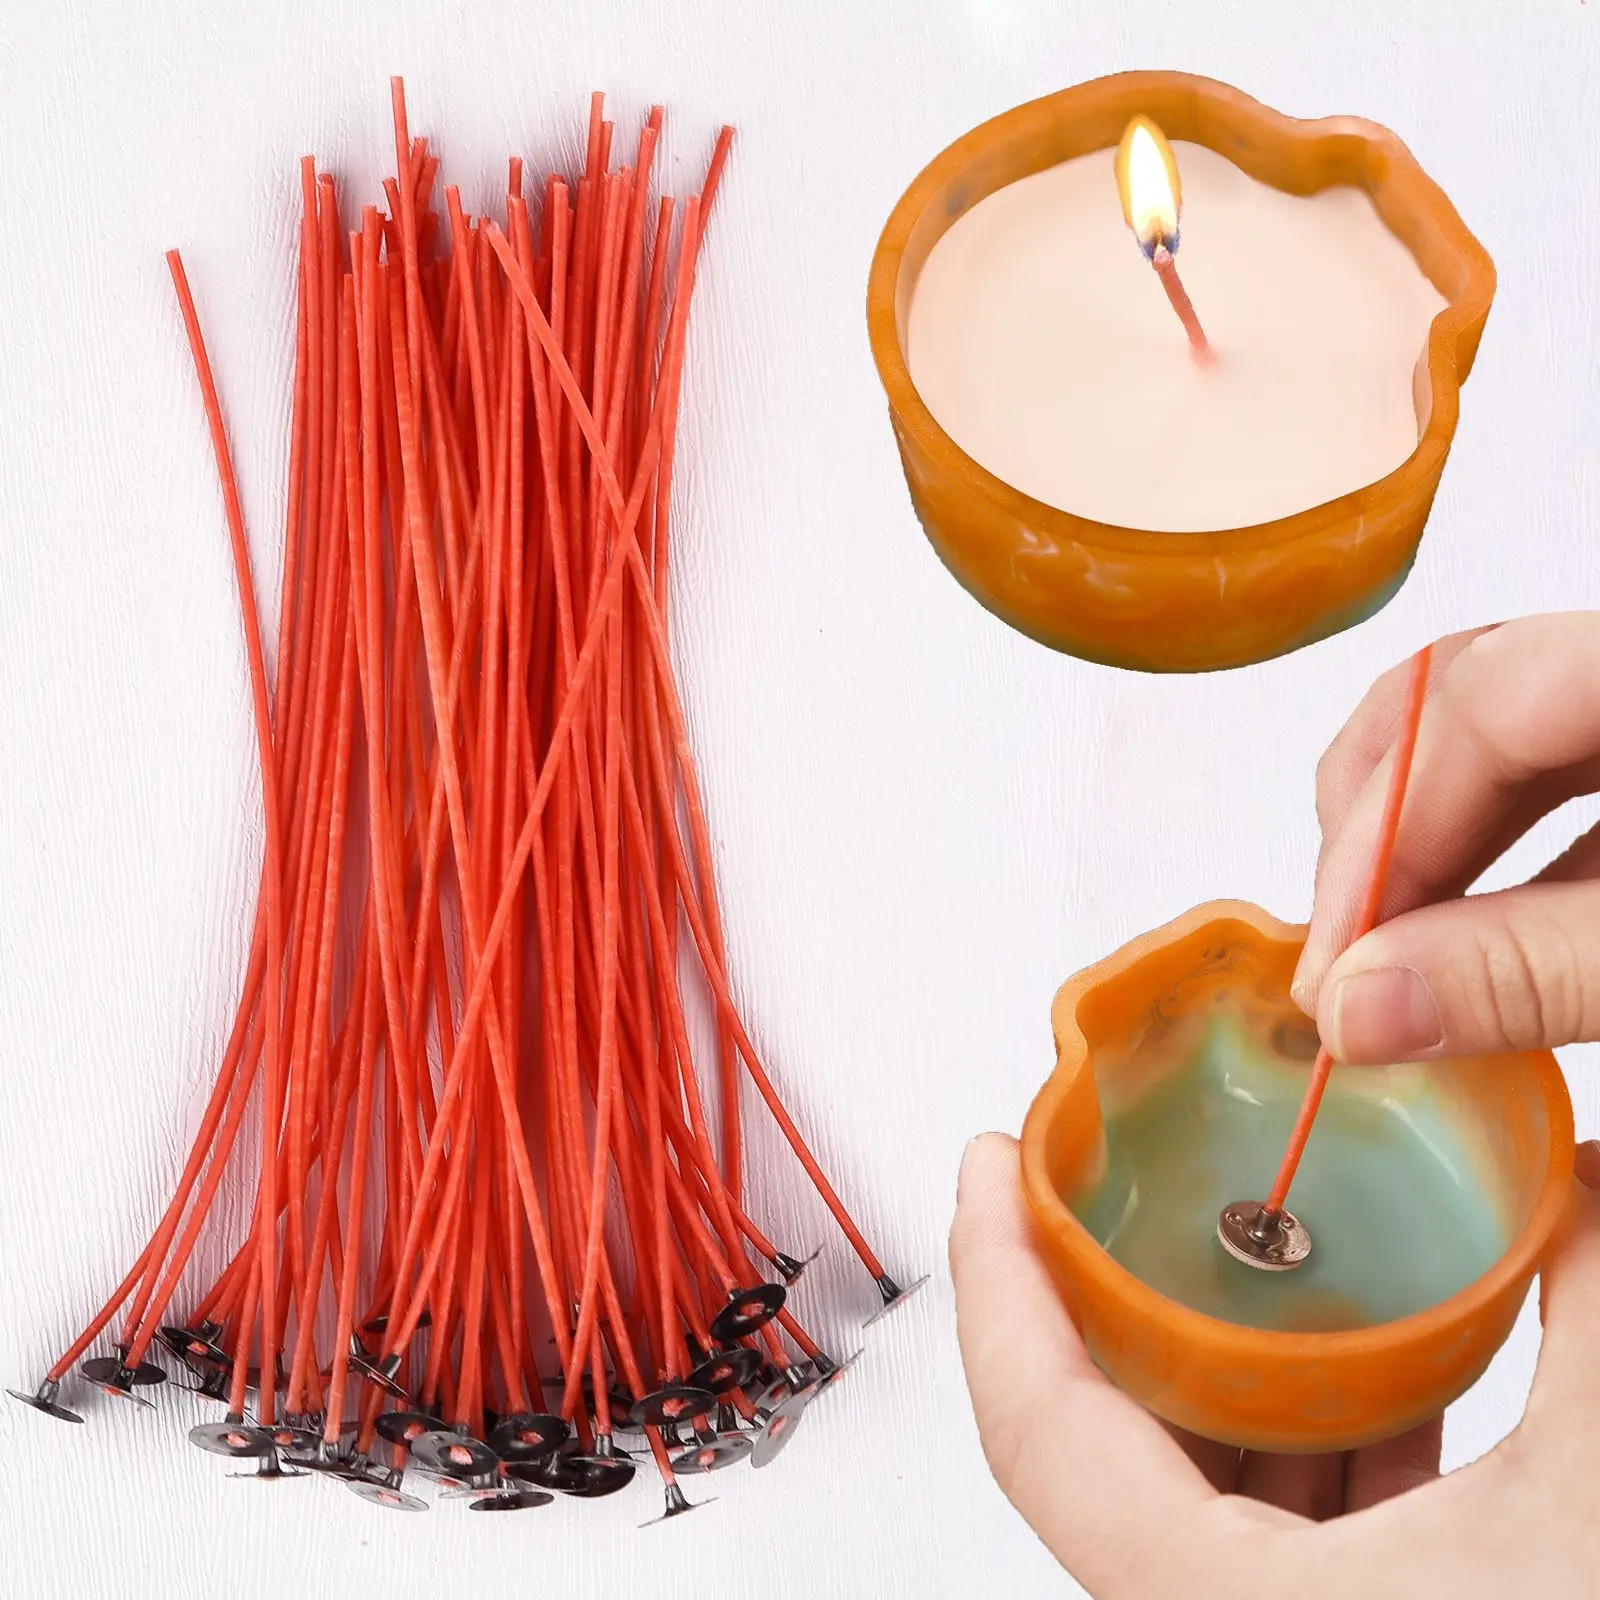 50Pcs Candle Wicks Pre-Waxed Wick 6 Inch For Candles Cotton Core DIY Making